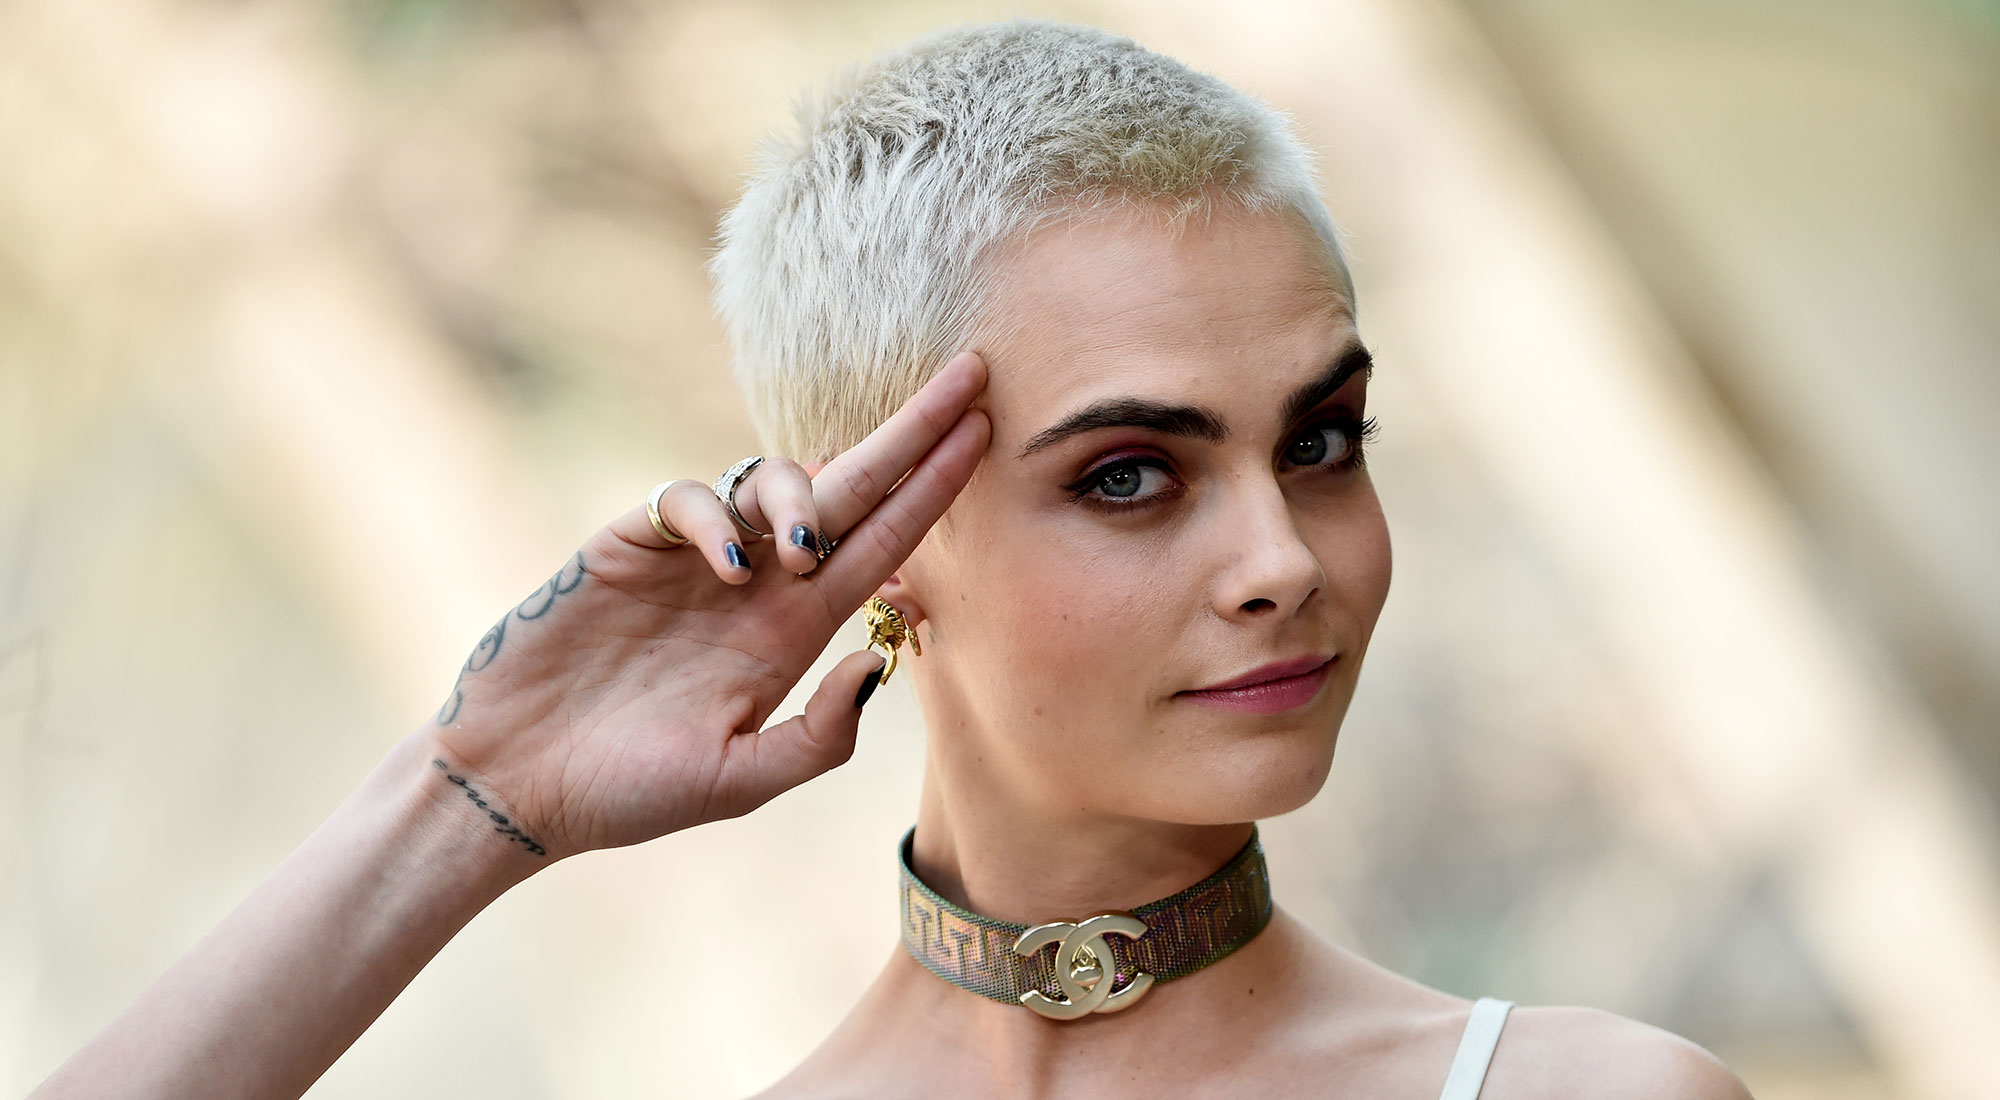 Cara Delevingne Photos News Videos and Gallery  Just Jared Jr  Page 4